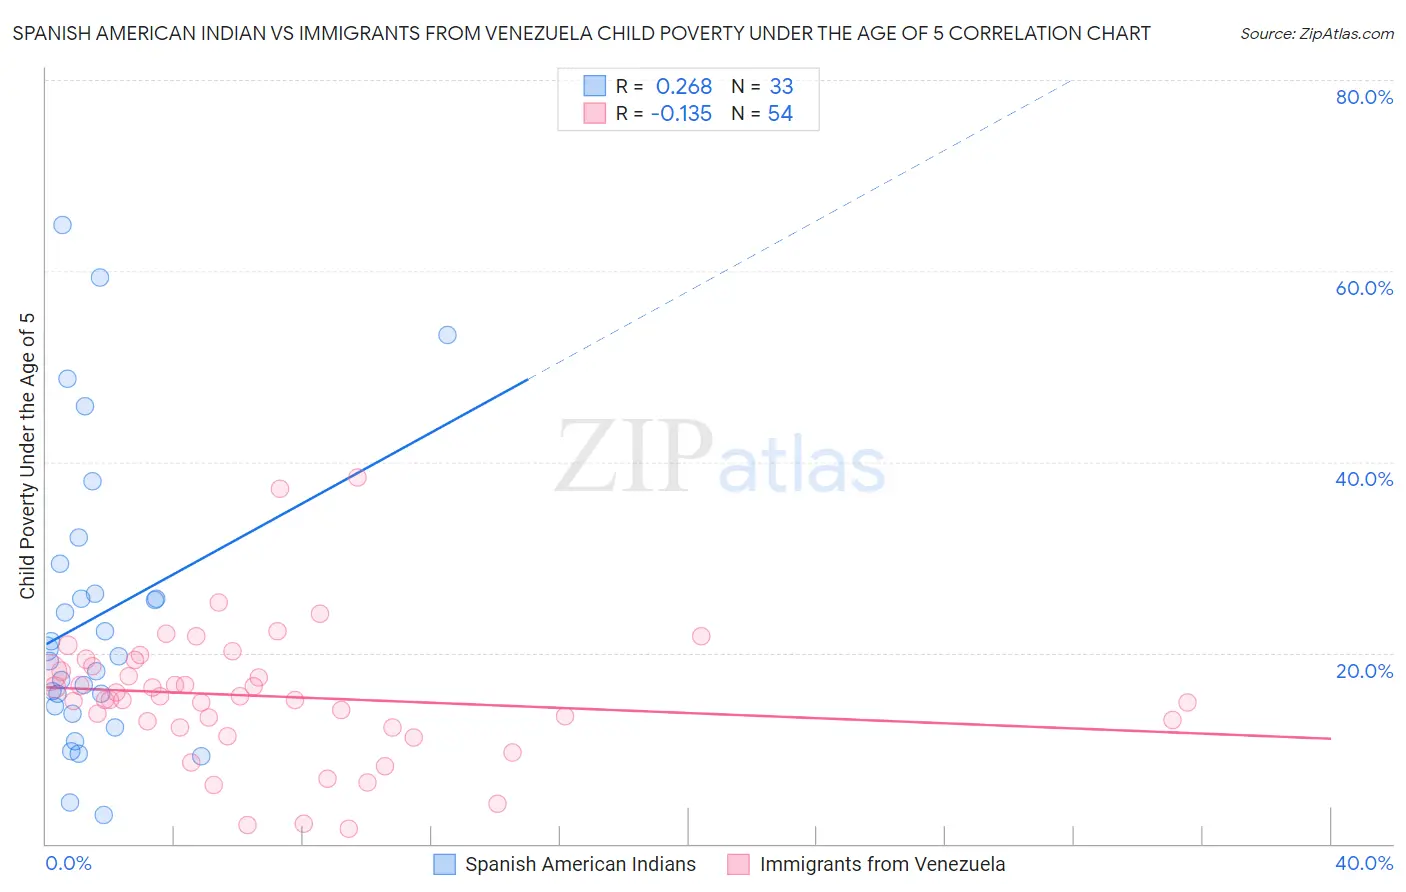 Spanish American Indian vs Immigrants from Venezuela Child Poverty Under the Age of 5